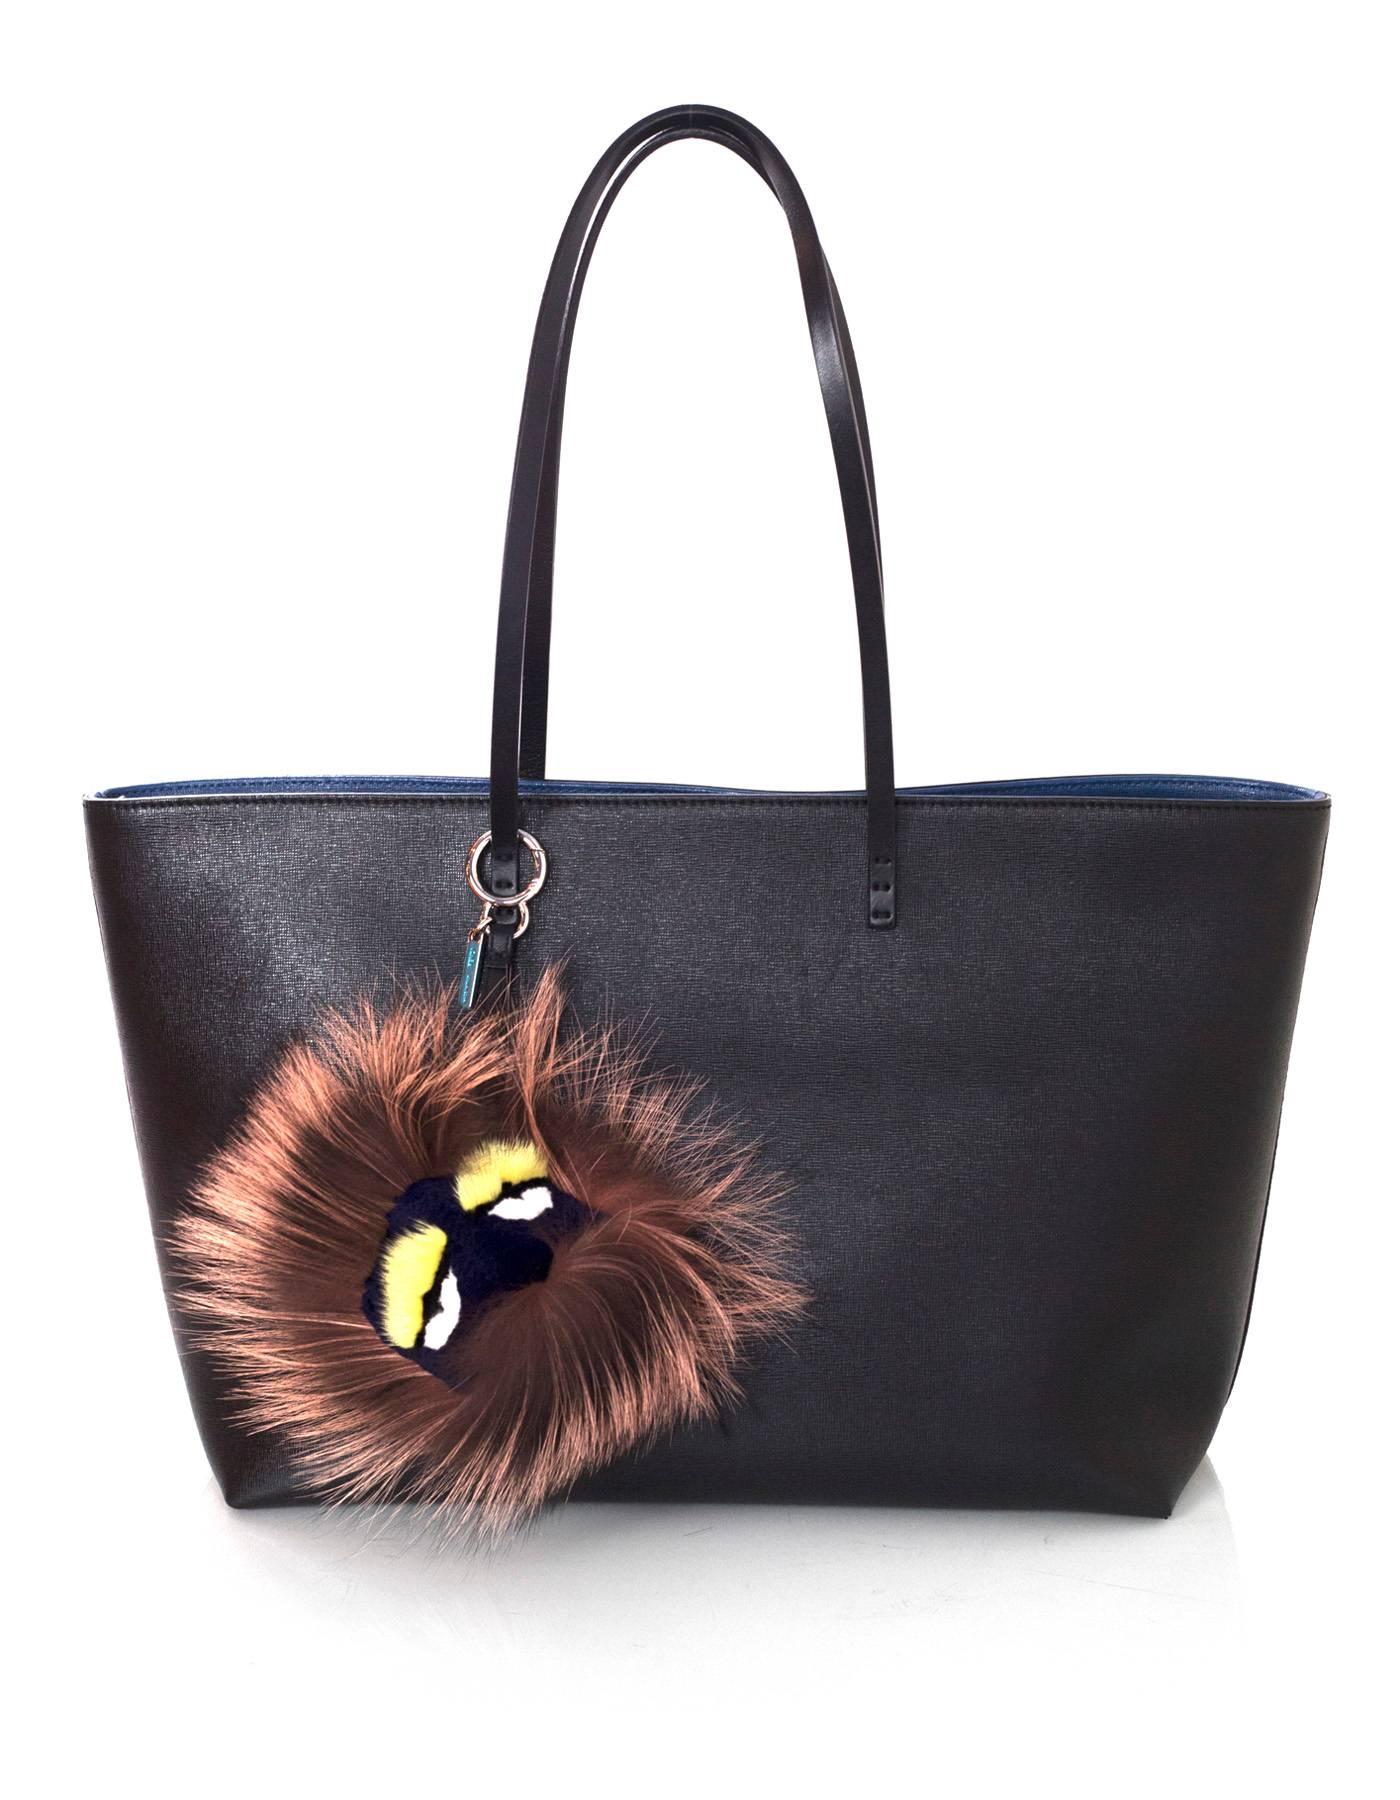 Fendi Taupe Mink & Fox Fur Bag Bug Charm - NIB

Made In: Italy
Color: Taupe, navy
Hardware: Silvertone
Materials: Fox, mink
Closure/Opening: Jump ring push lever
Retail Price: $850 + tax
Overall Condition: Excellent- NEW
Includes: Fendi box and